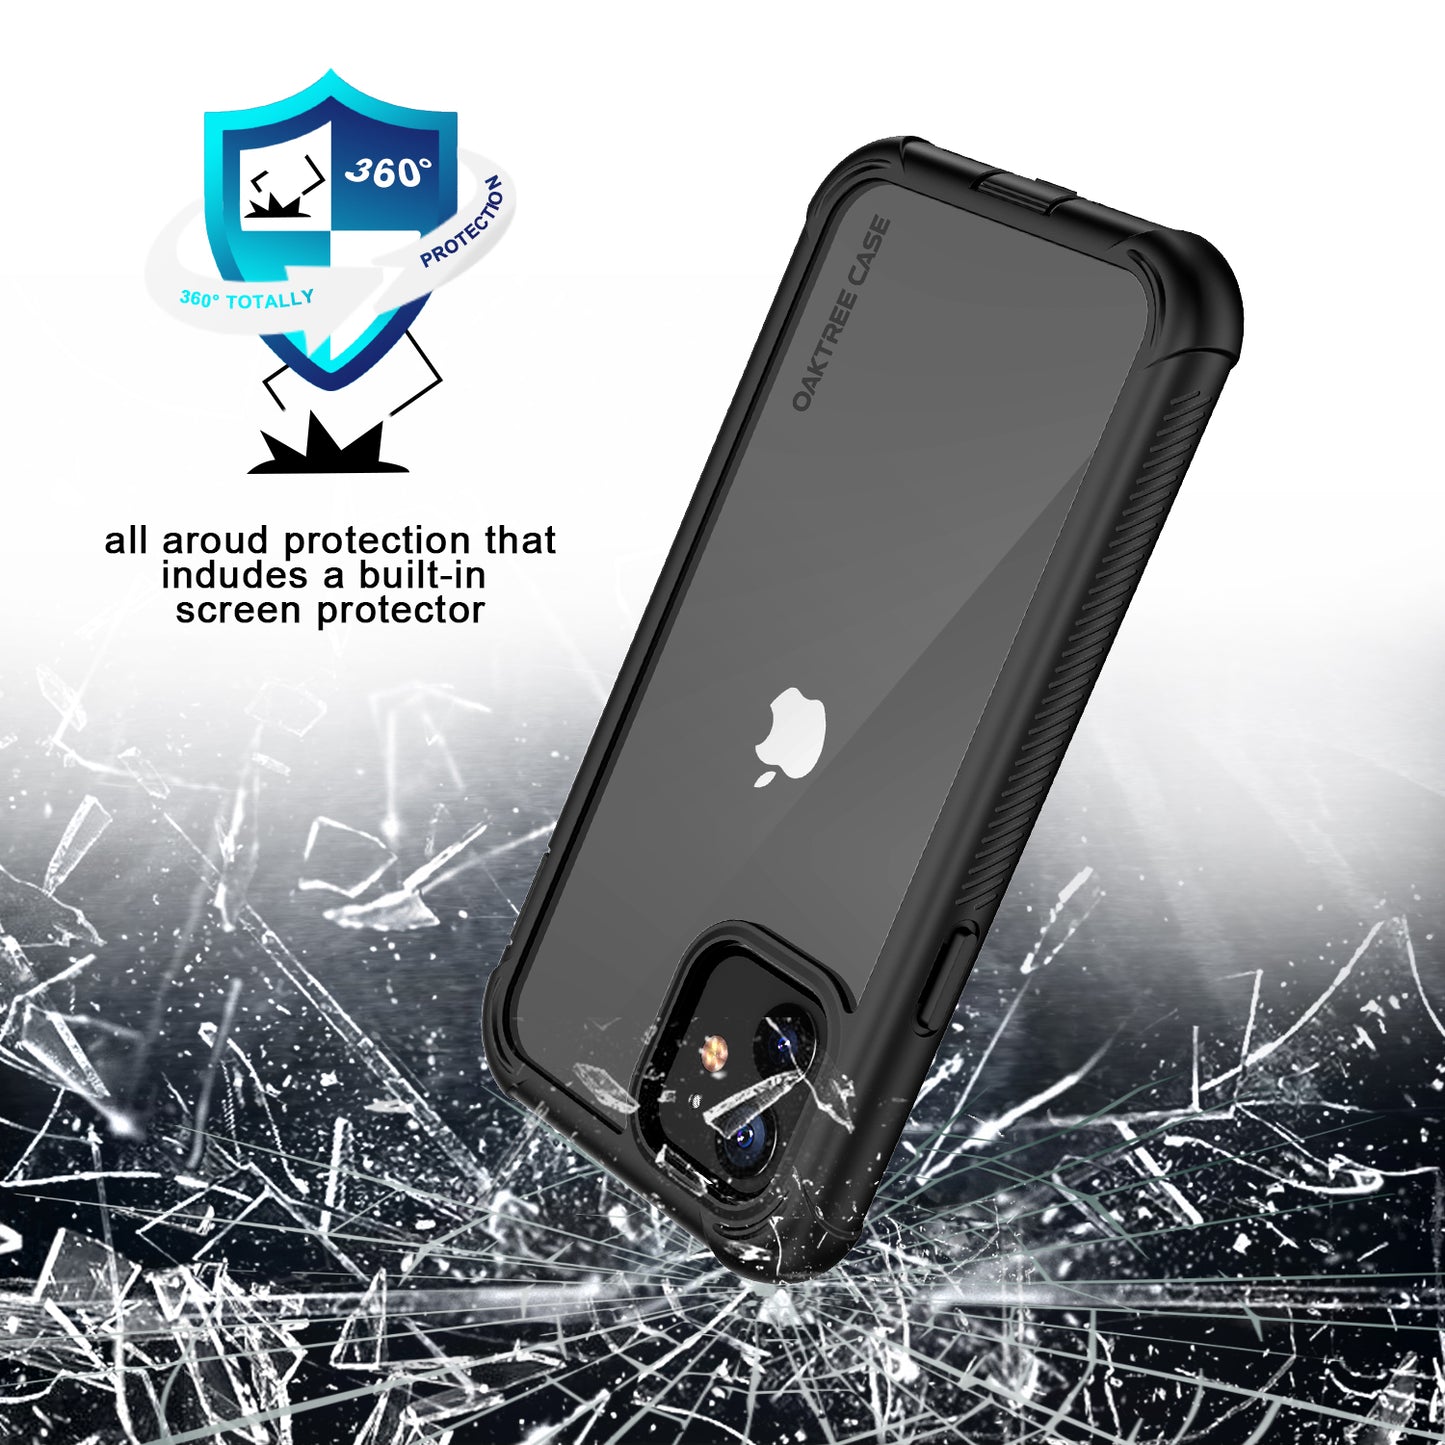 OAKTREE iPhone 12 Mini Full-Body Rugged Clear Case with Built-in Screen Protector